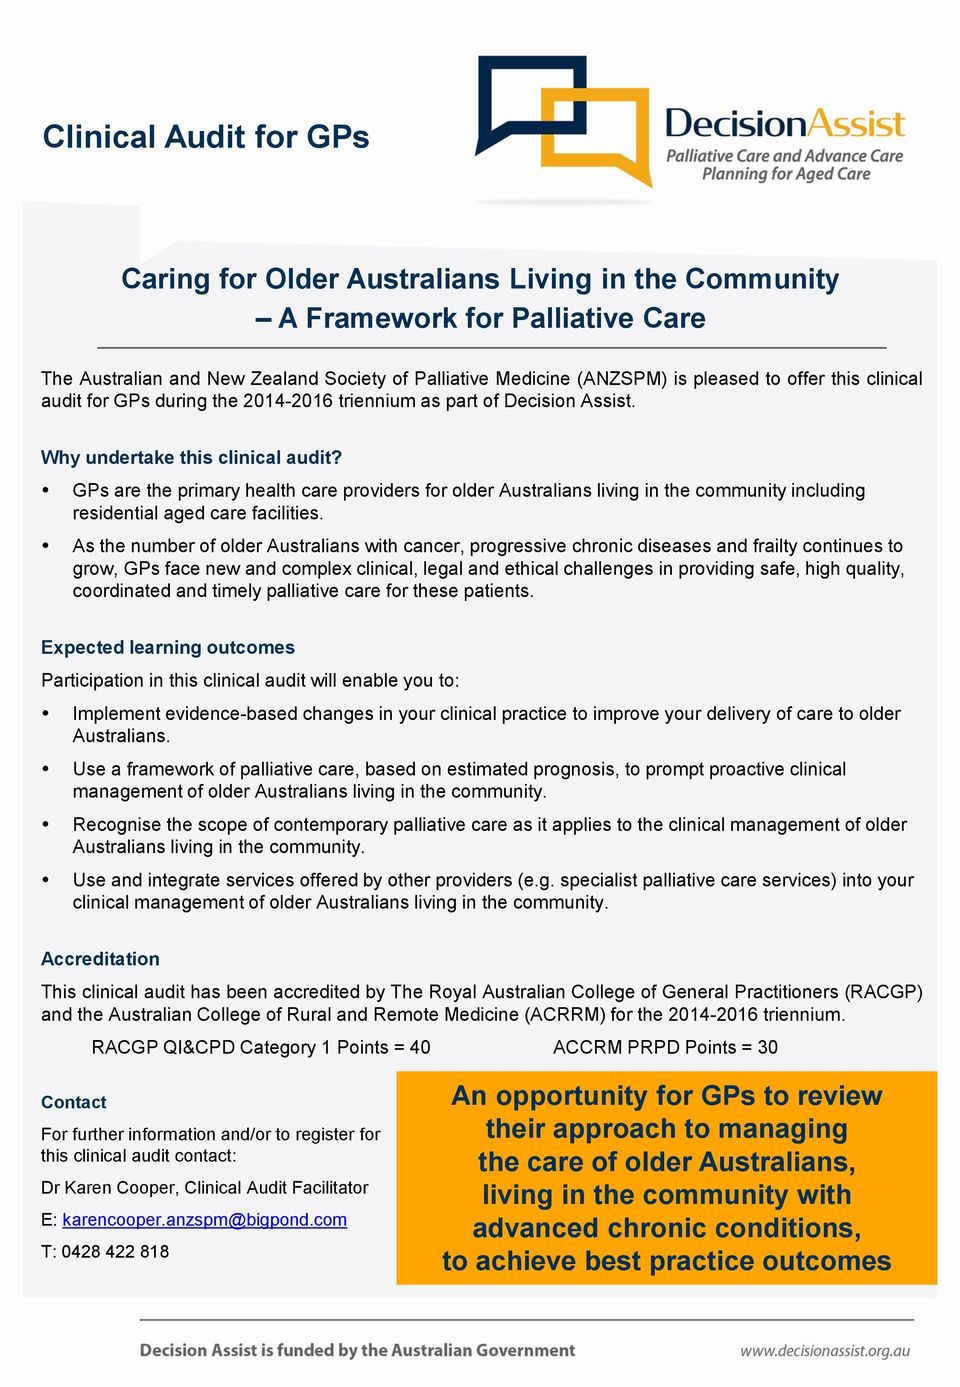 GPs are the primary health care providers for older Australians living in the community including residential aged care facilities.